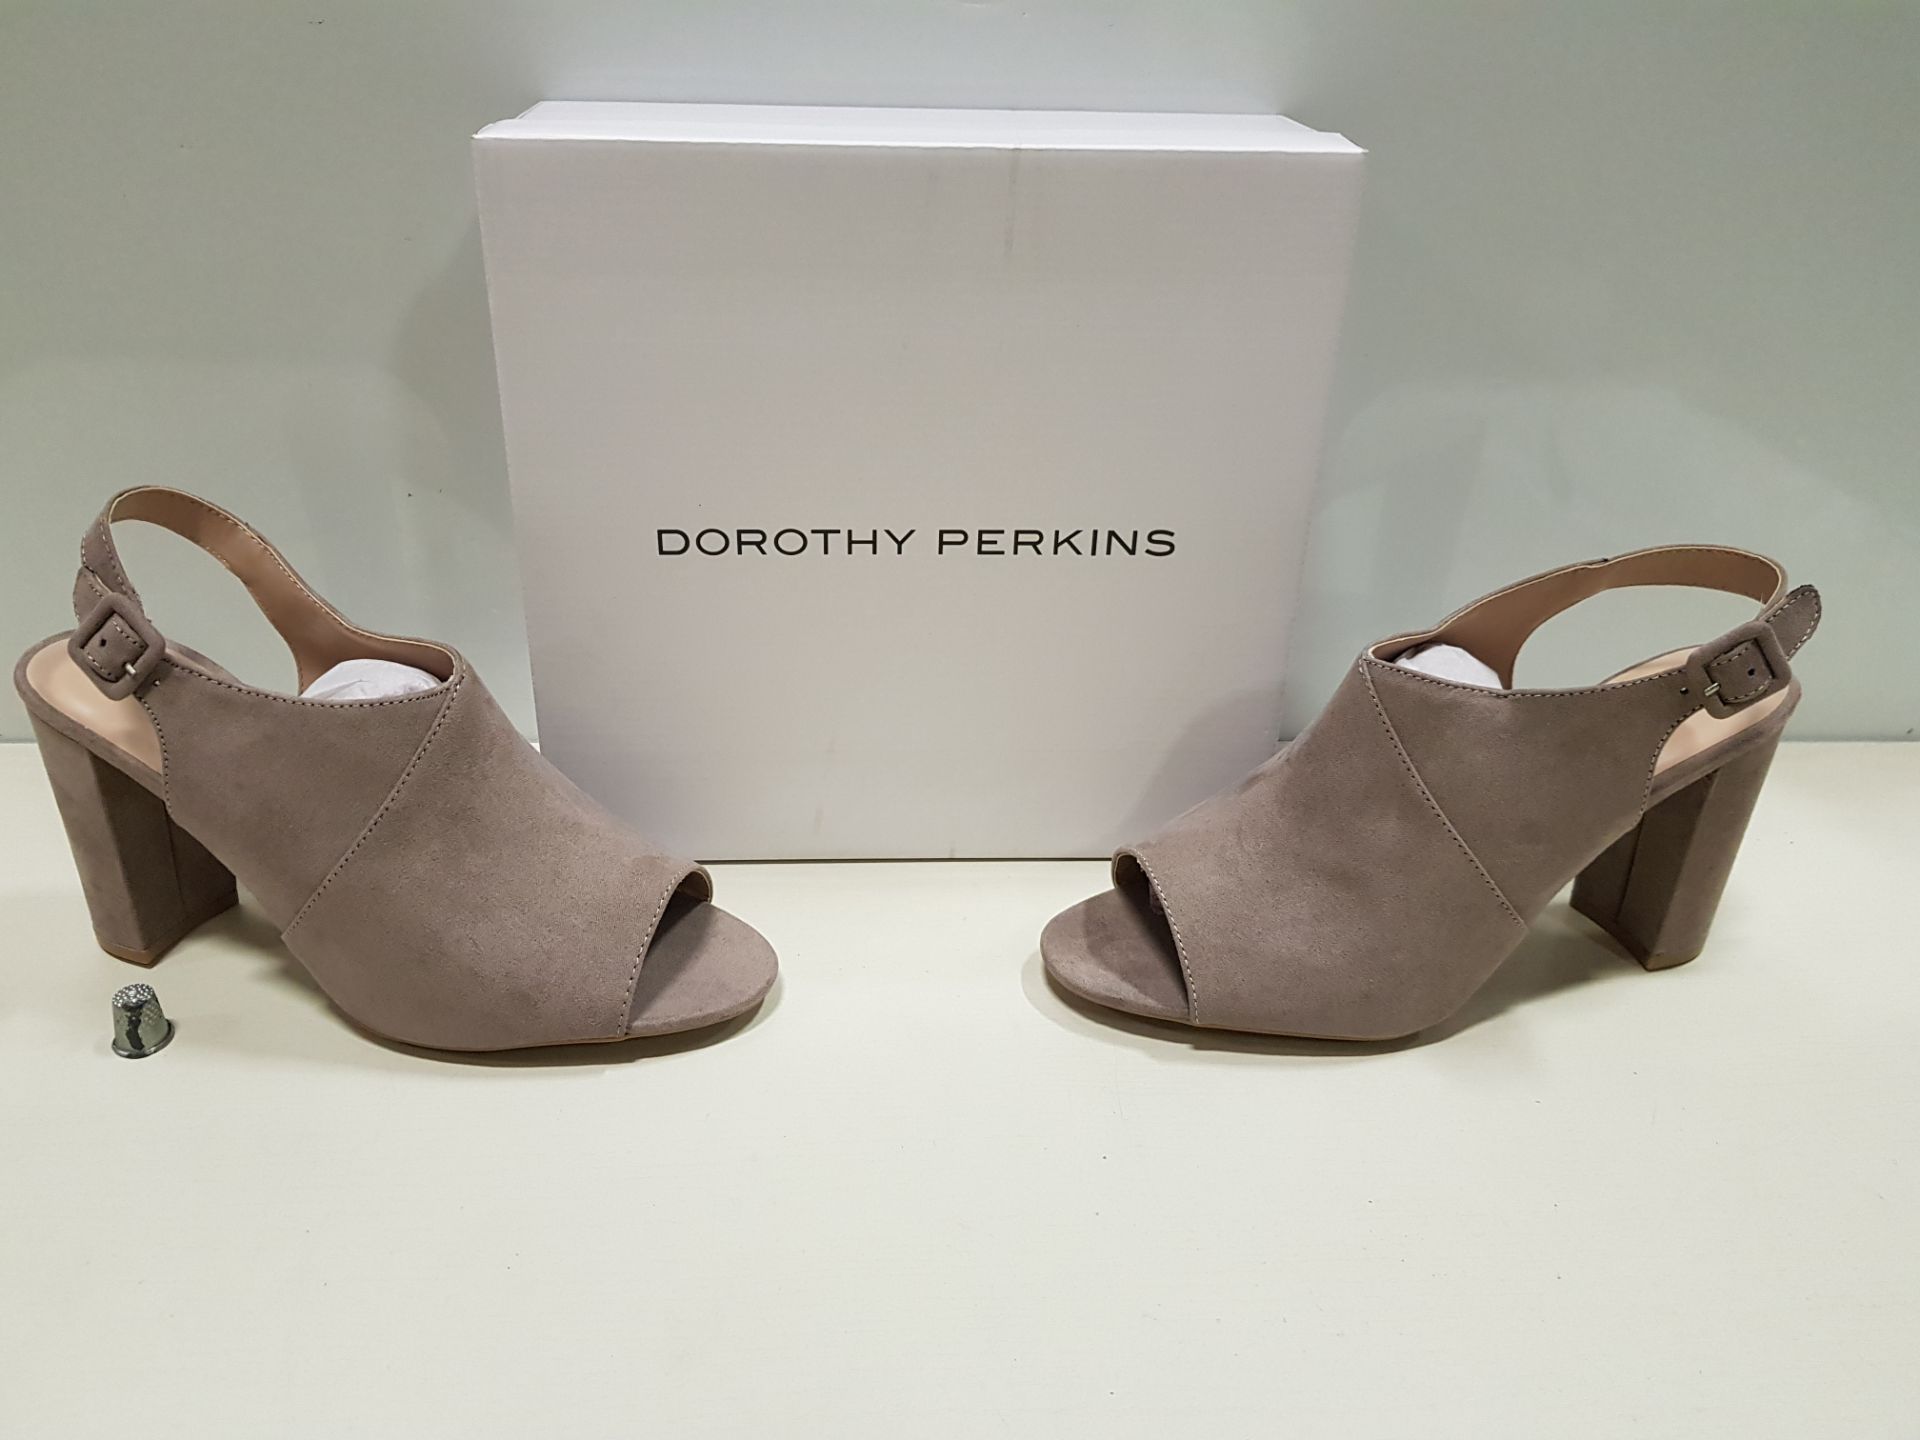 16 X BRAND NEW DOROTHY PERKINS TAUPE SAVO HEELED SANDALS UK SIZE 6 RRP-£28.00 TOTAL RRP-£448.00